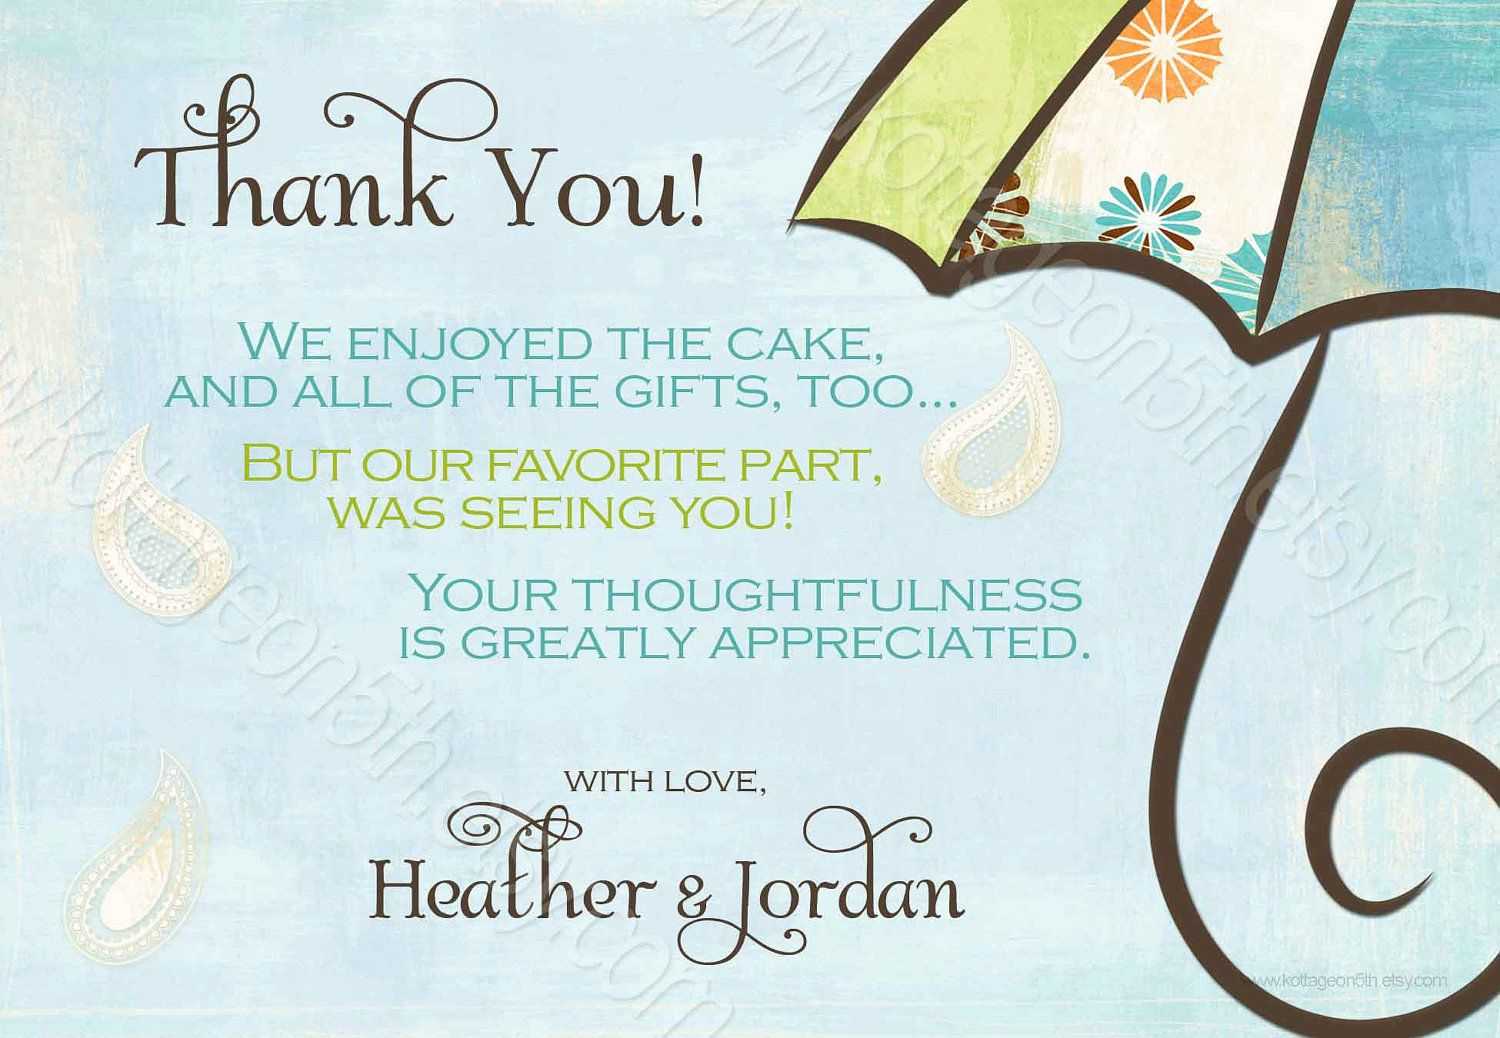 Generic Baby Shower Thank You Wording – Yahoo Image Search Throughout Template For Baby Shower Thank You Cards